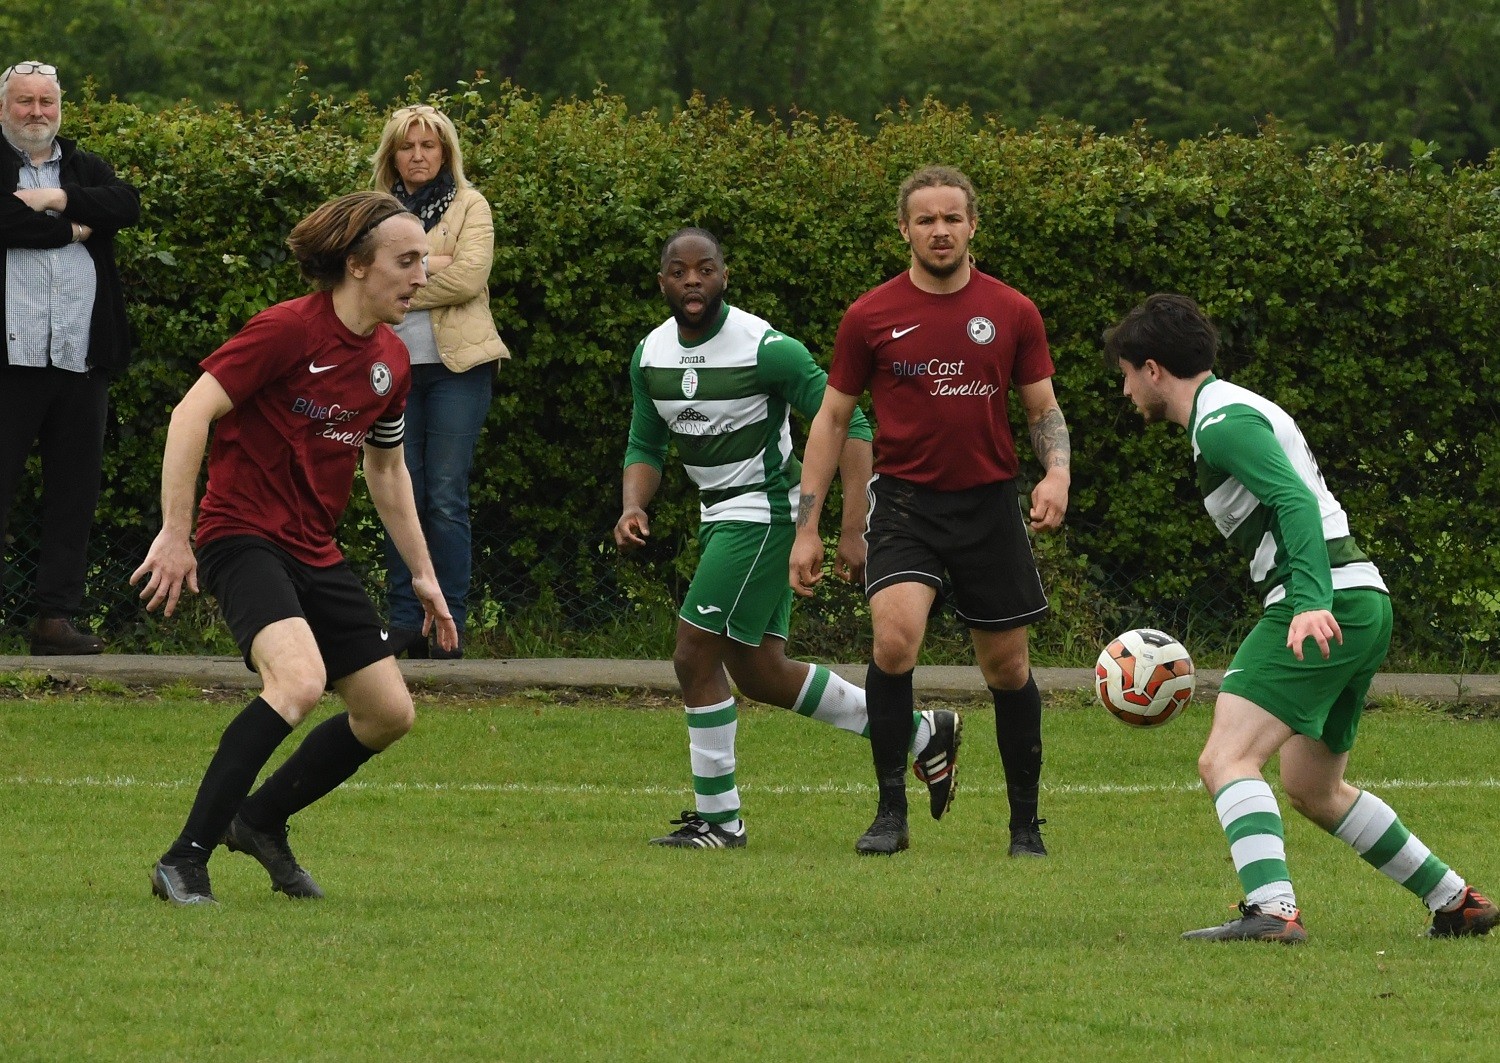 WEEK 33 REVIEW: Round-up of all the Corinthian League action from the weekend